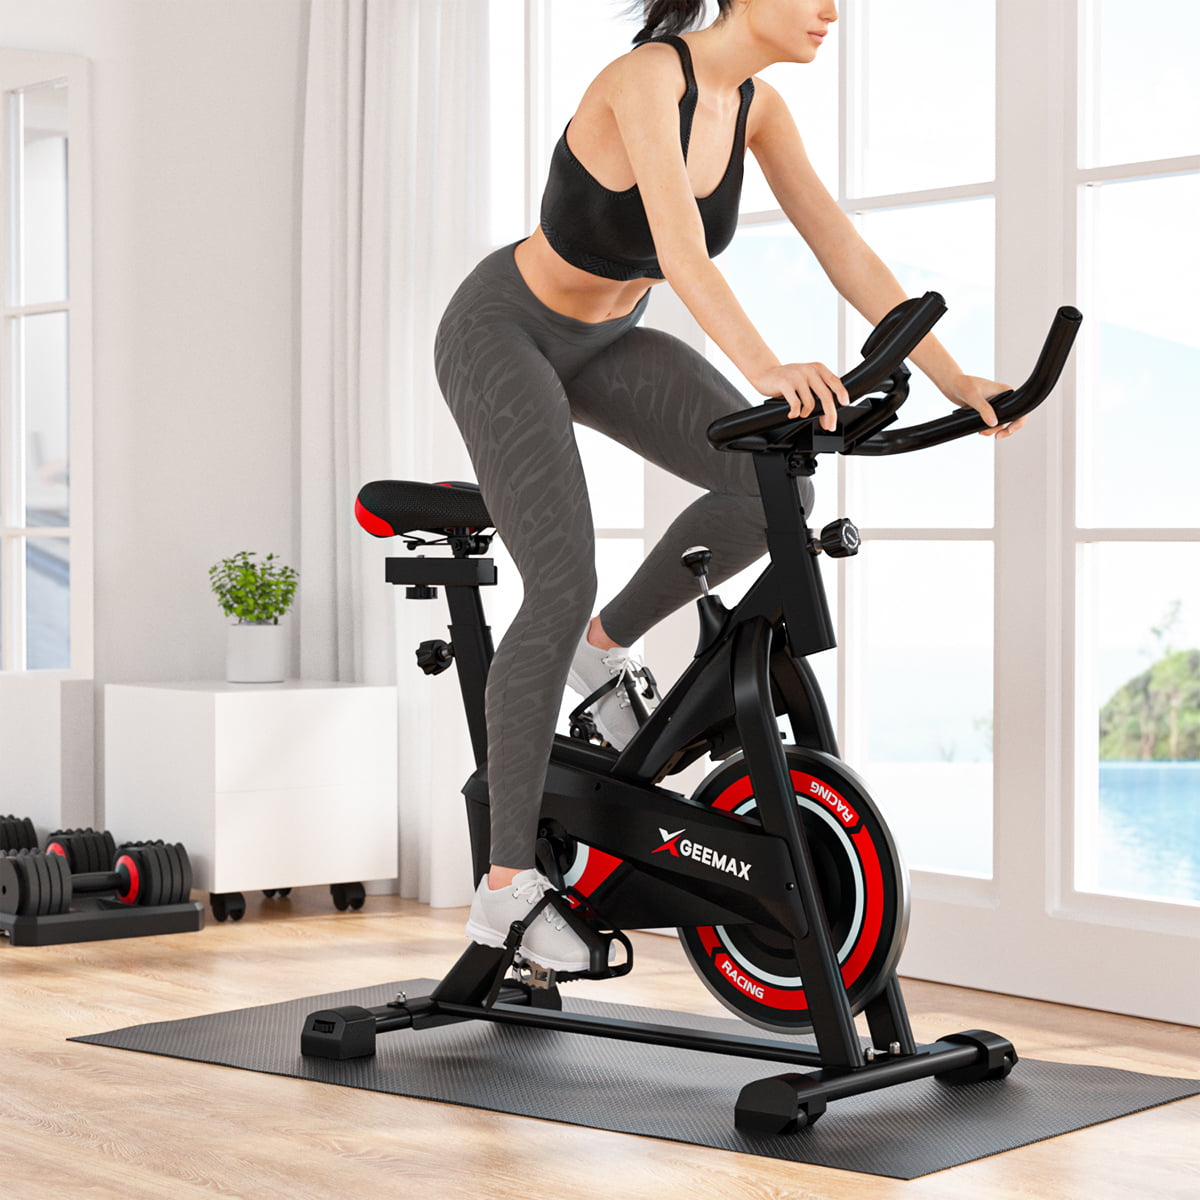 Bicycle Cycling Exercise Bike Stationary Fitness Cardio Home Workout Gym Indoor 